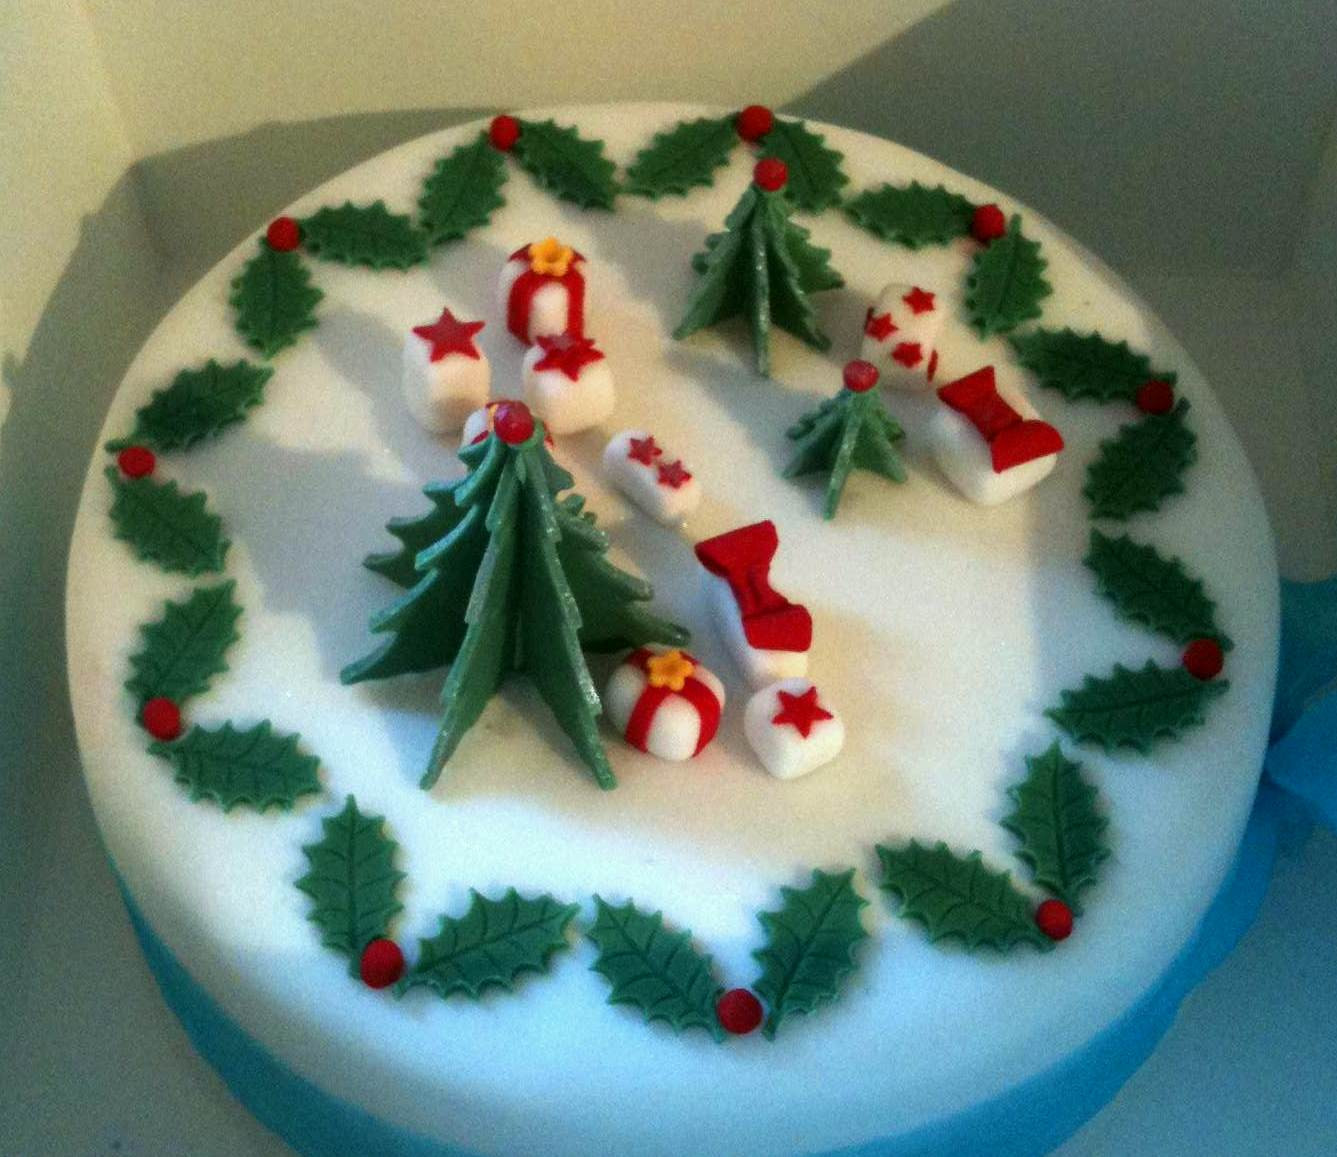 Decorated Christmas Cakes
 Pool Christmas Cakes